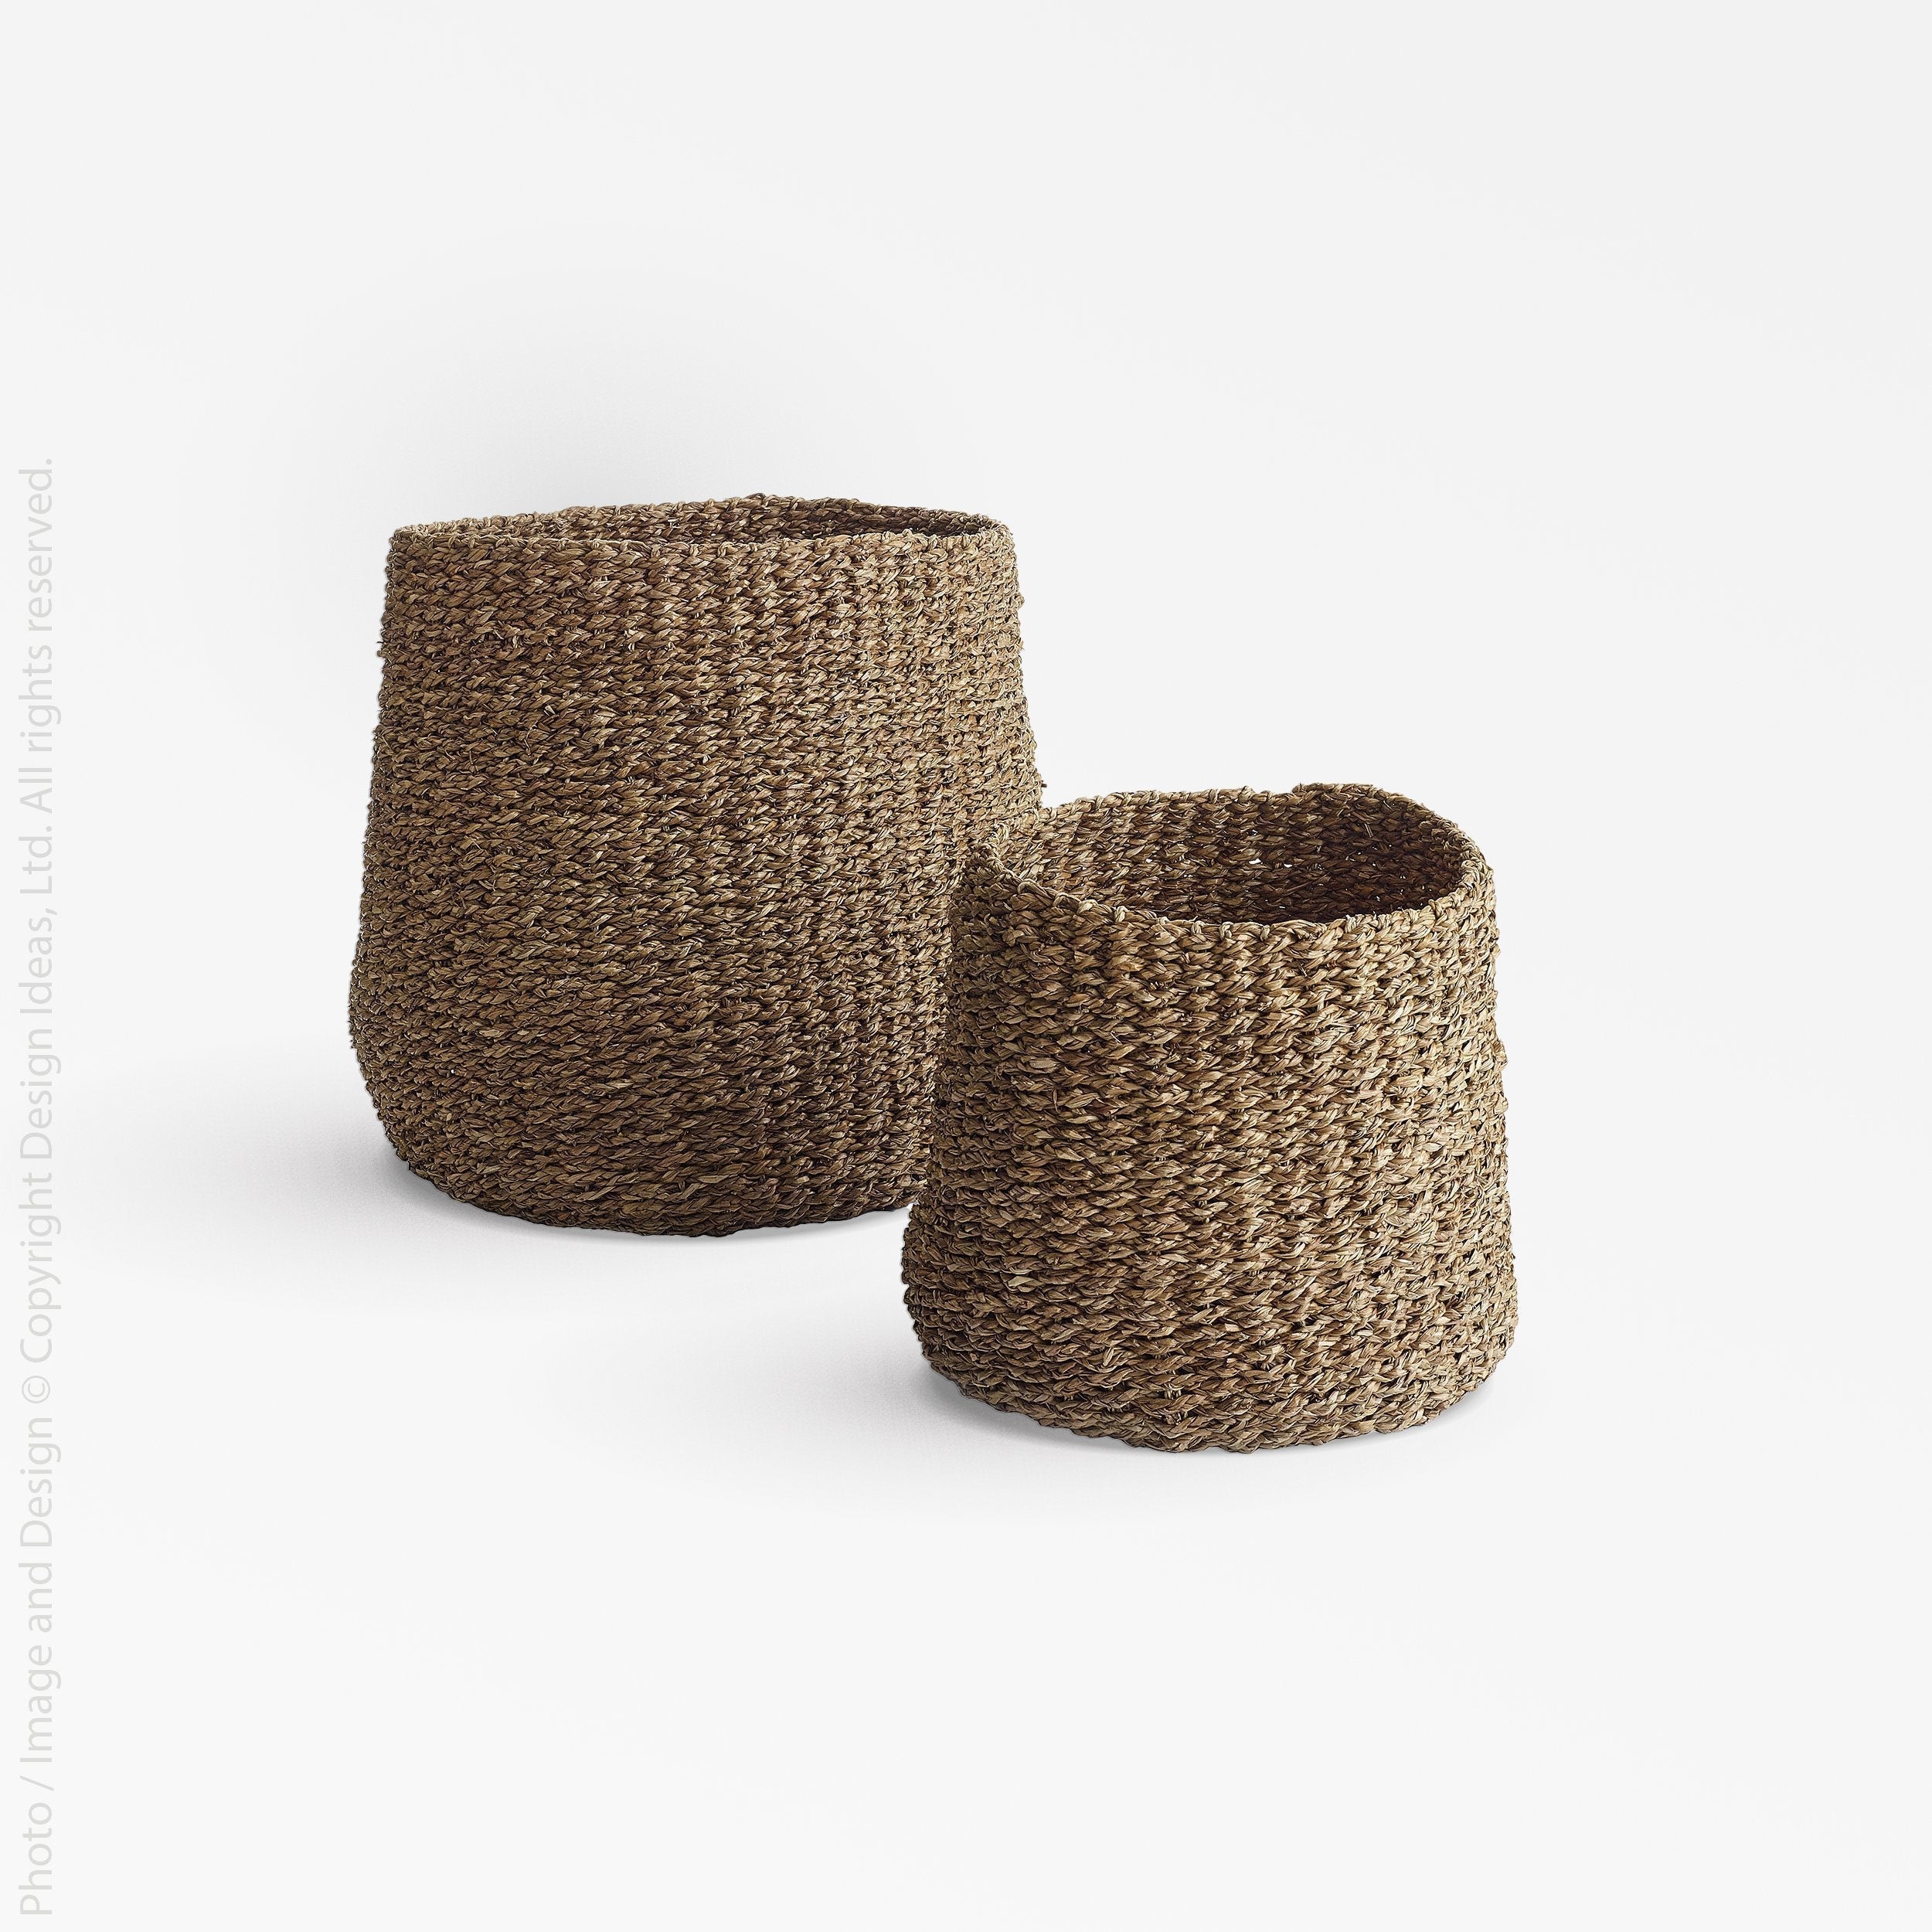 Stonington™ baskets (set of 2) - Natural | Image 1 | Premium Basket from the Stonington collection | made with Seagrass for long lasting use | texxture